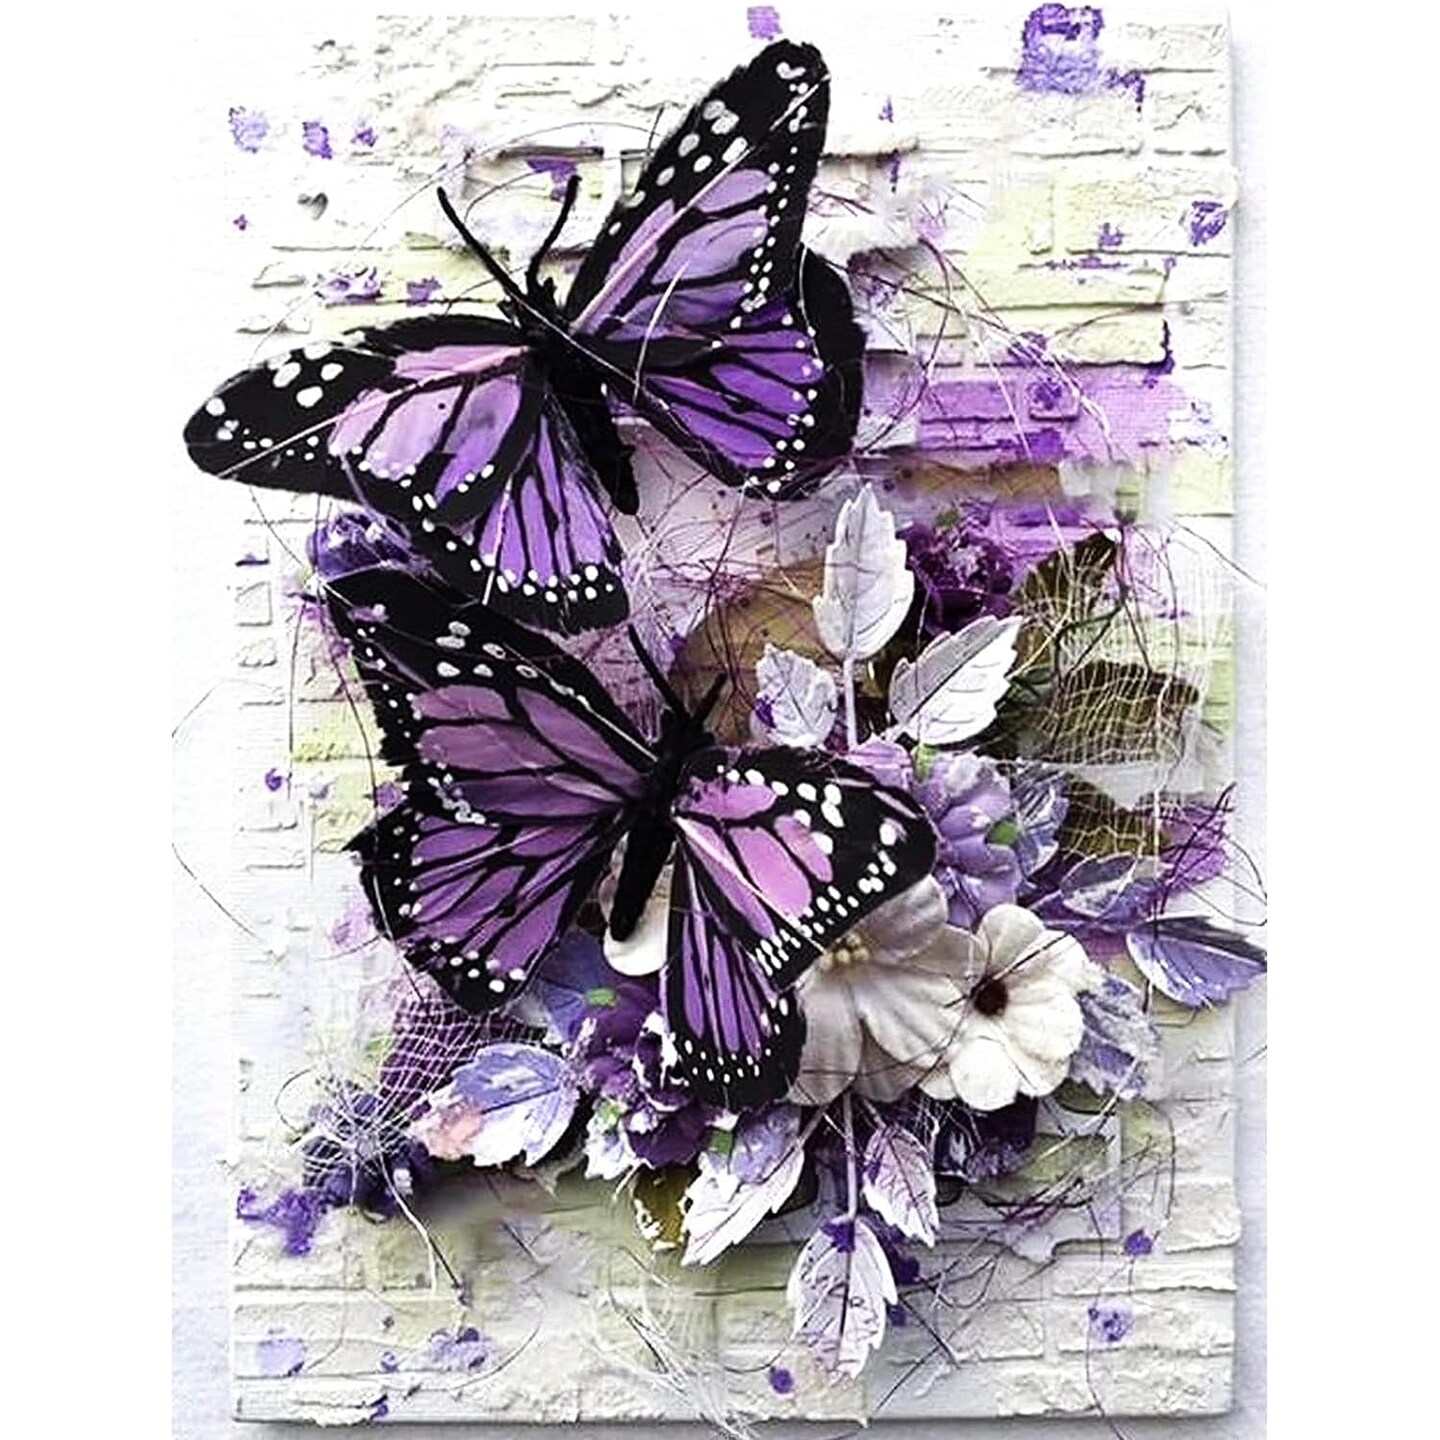 Diamond Painting Kits for Adults DIY 5D Round Full Drill Butterfly Flowers Diamond Art Adult 5d Diamond Painting Very Suitable for Home Leisure and Wall Decoration 11.8x15.7 (Inches) Diamond Painting